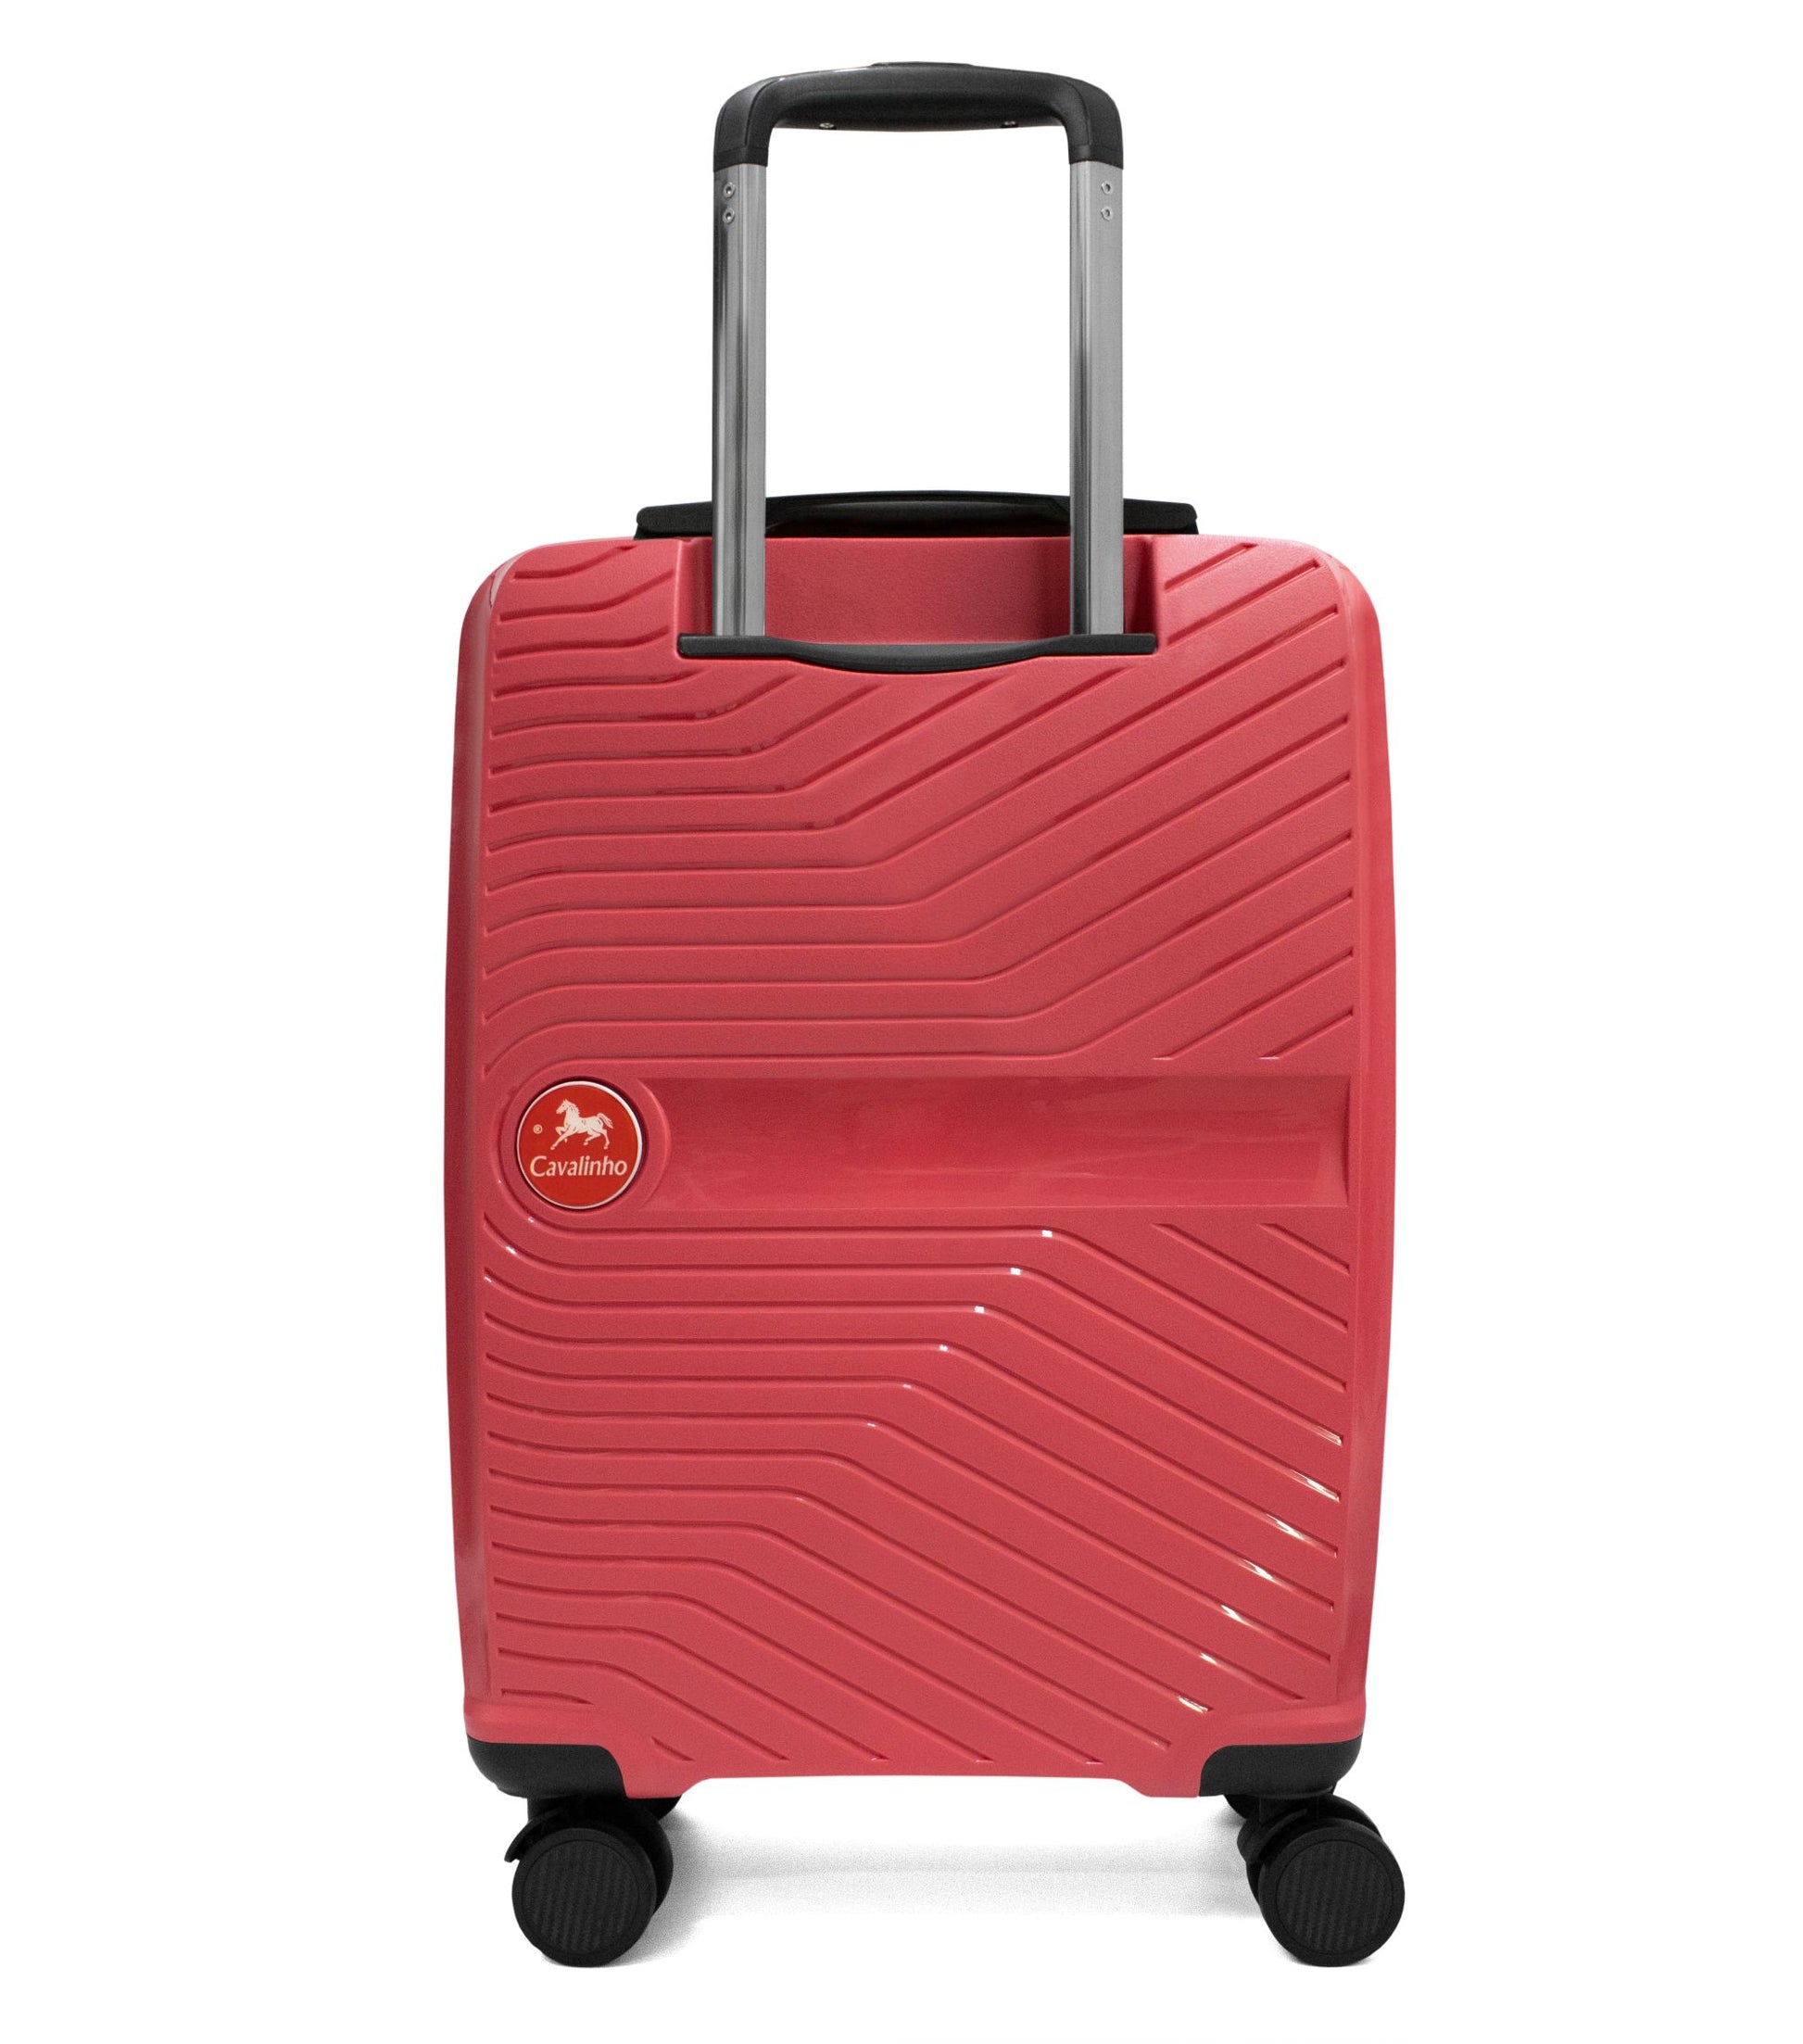 #color_ 19 inch Coral | Cavalinho Colorful Carry-on Hardside Luggage (19") - 19 inch Coral - 68020004.27.19_3